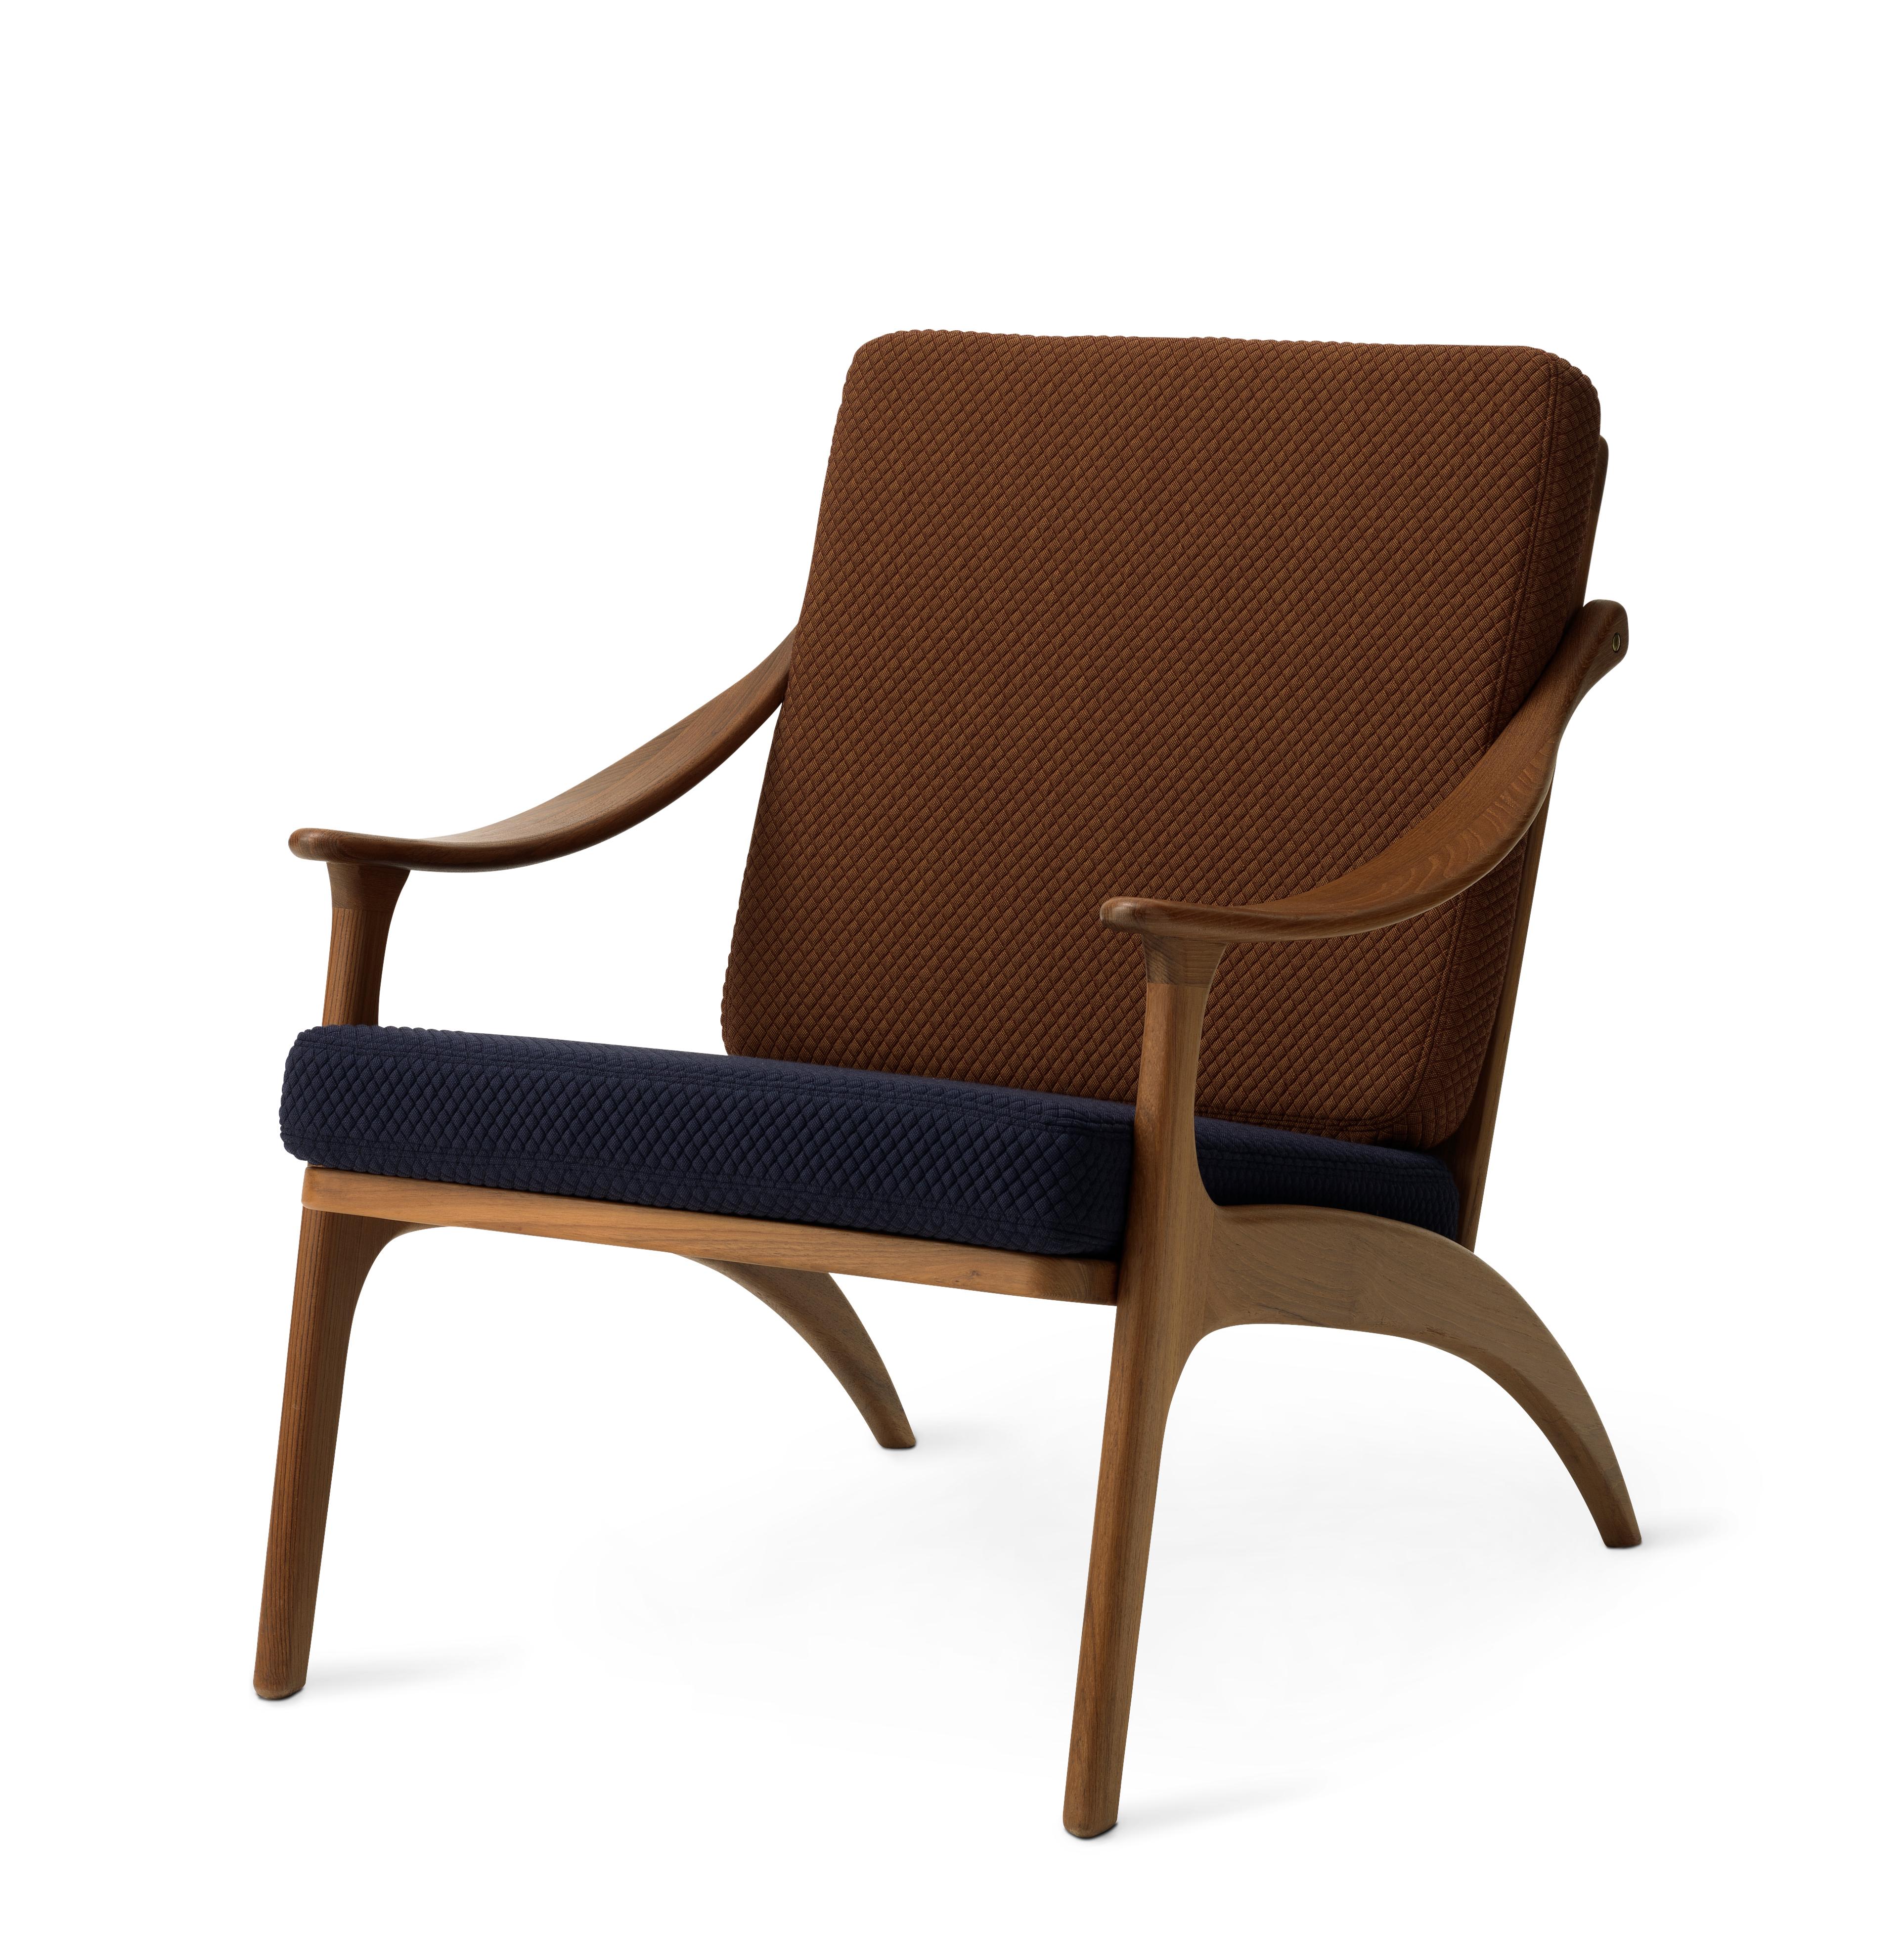 For Sale: Blue (Mosaic 692,472) Lean Back Lounge Two-Tone Chair in Teak, by Arne Hovmand-Olsen from Warm Nordic